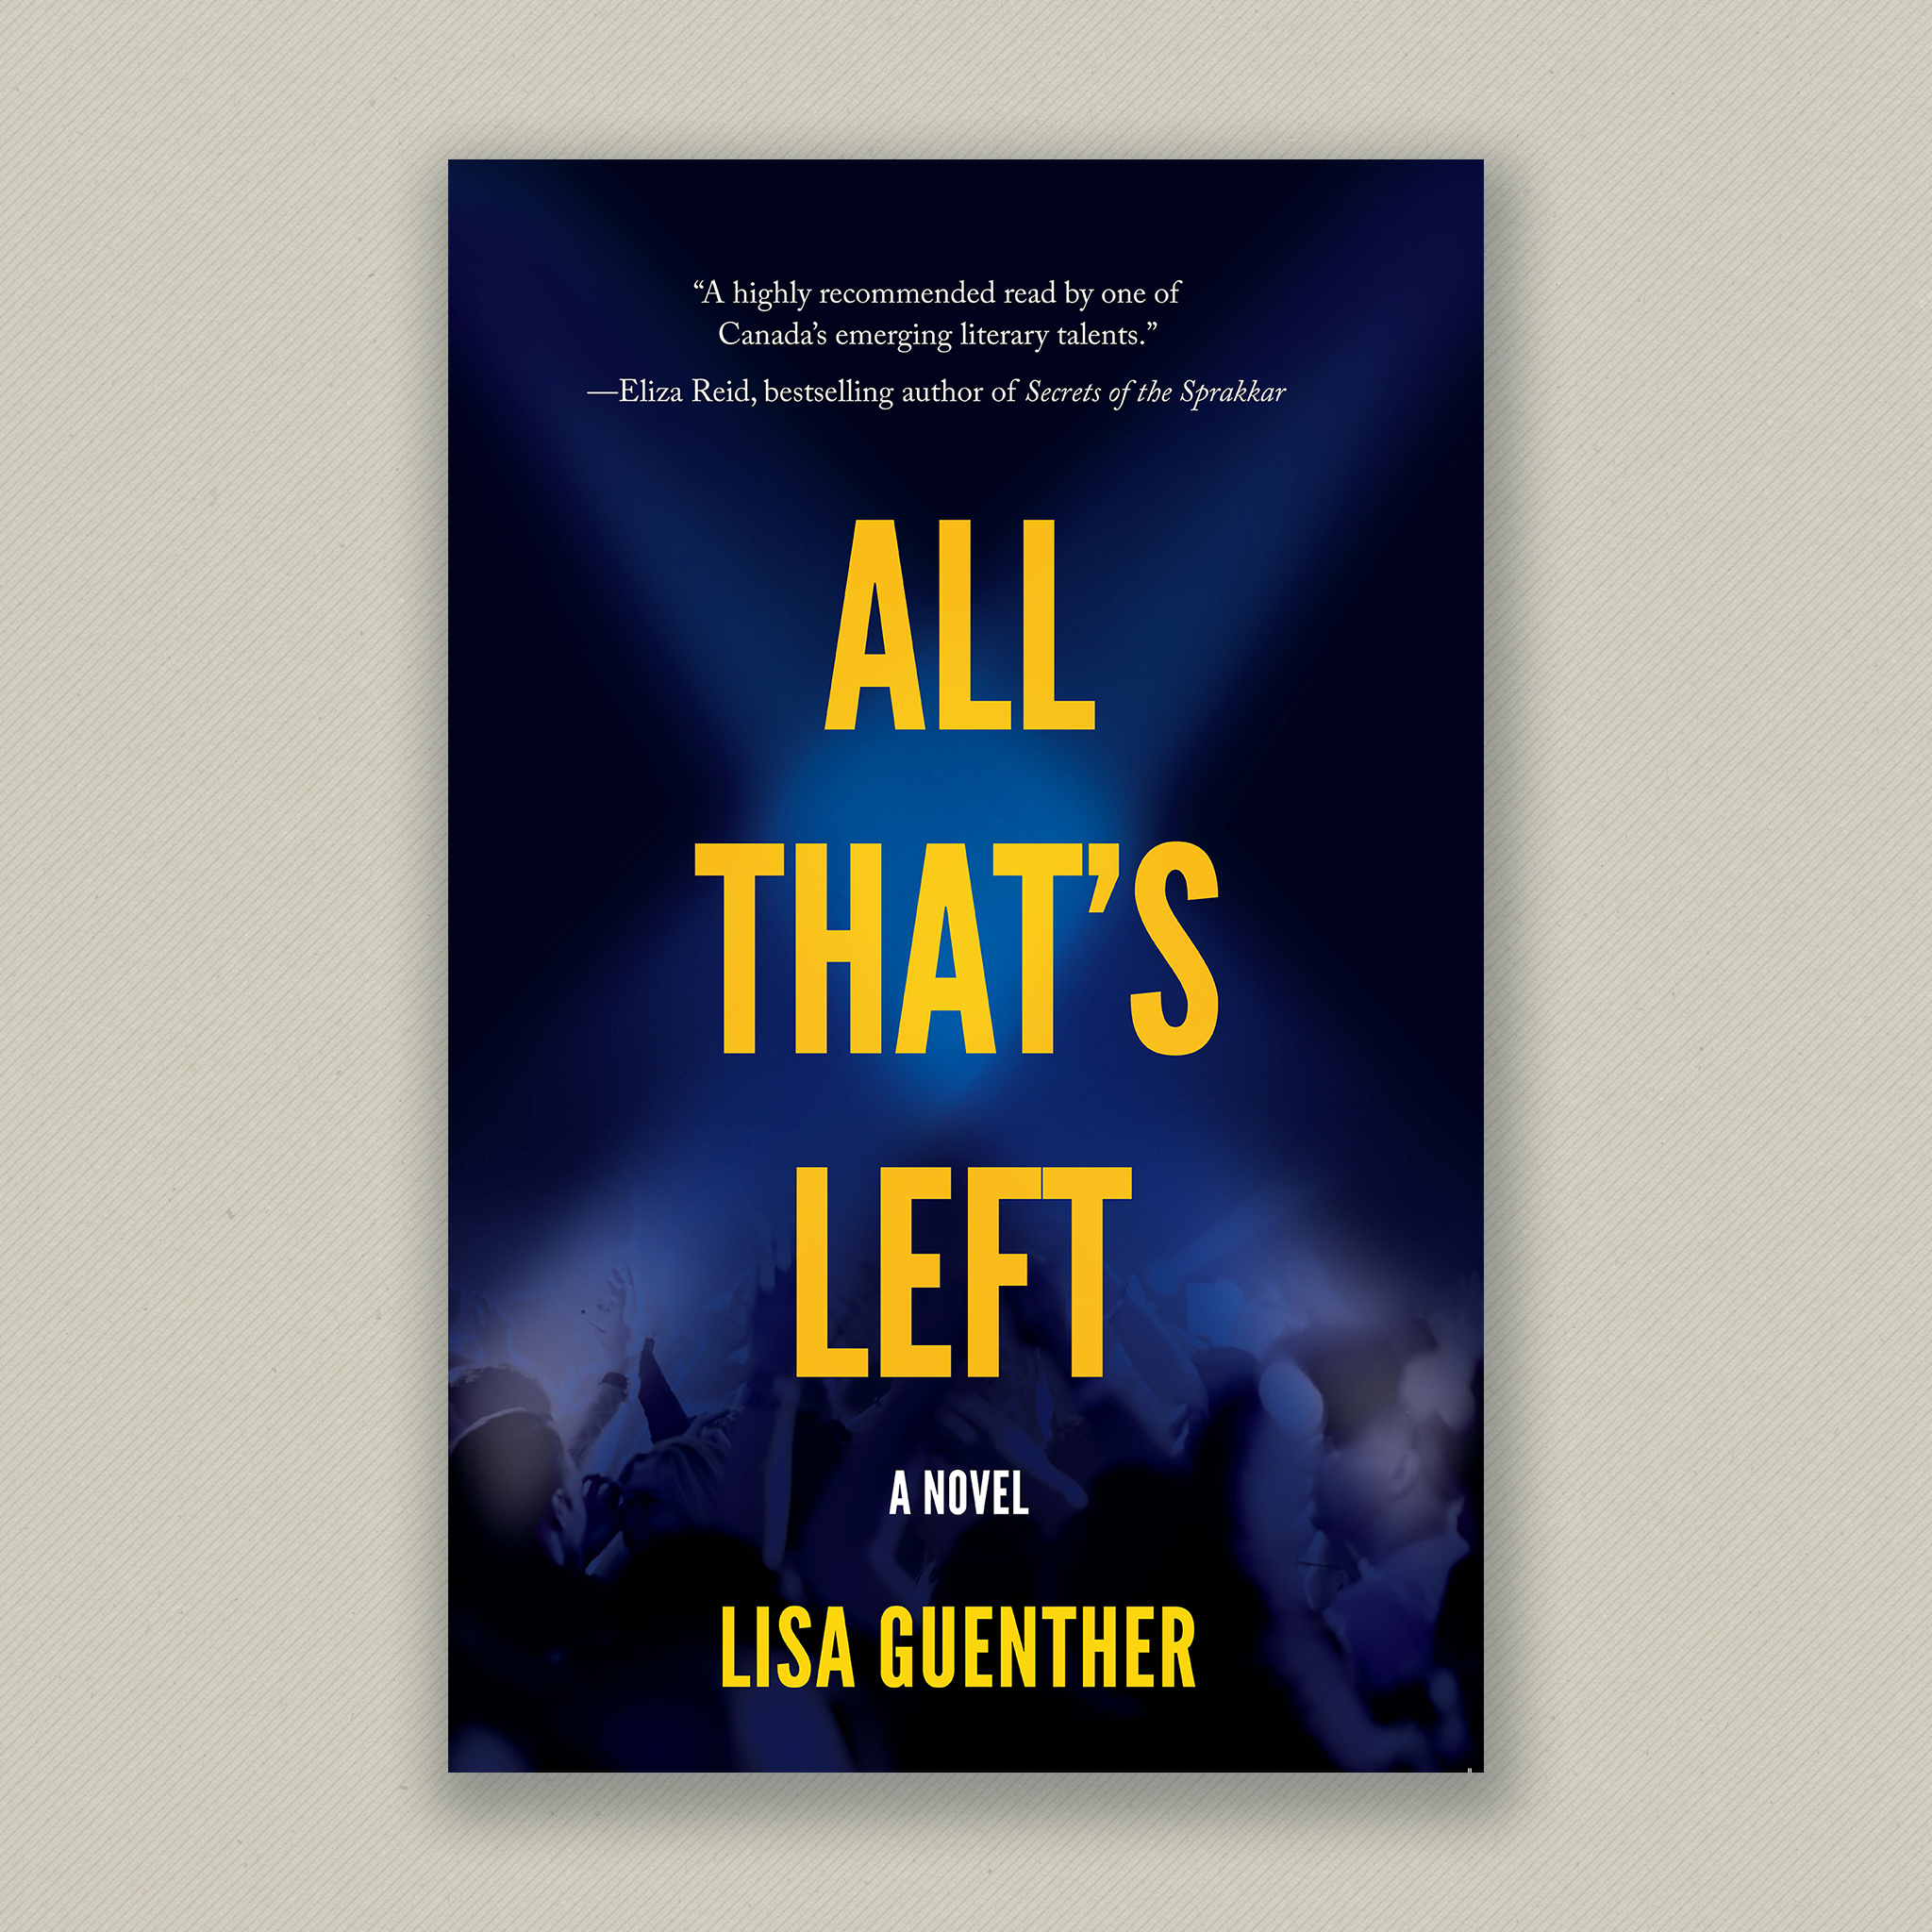 Book Cover: All That’s Left by Lisa Guenther. On a deep blue background, yellow titles appear, highlighted by spotlights spanning over the impression of a crowd dancing at a concert. 